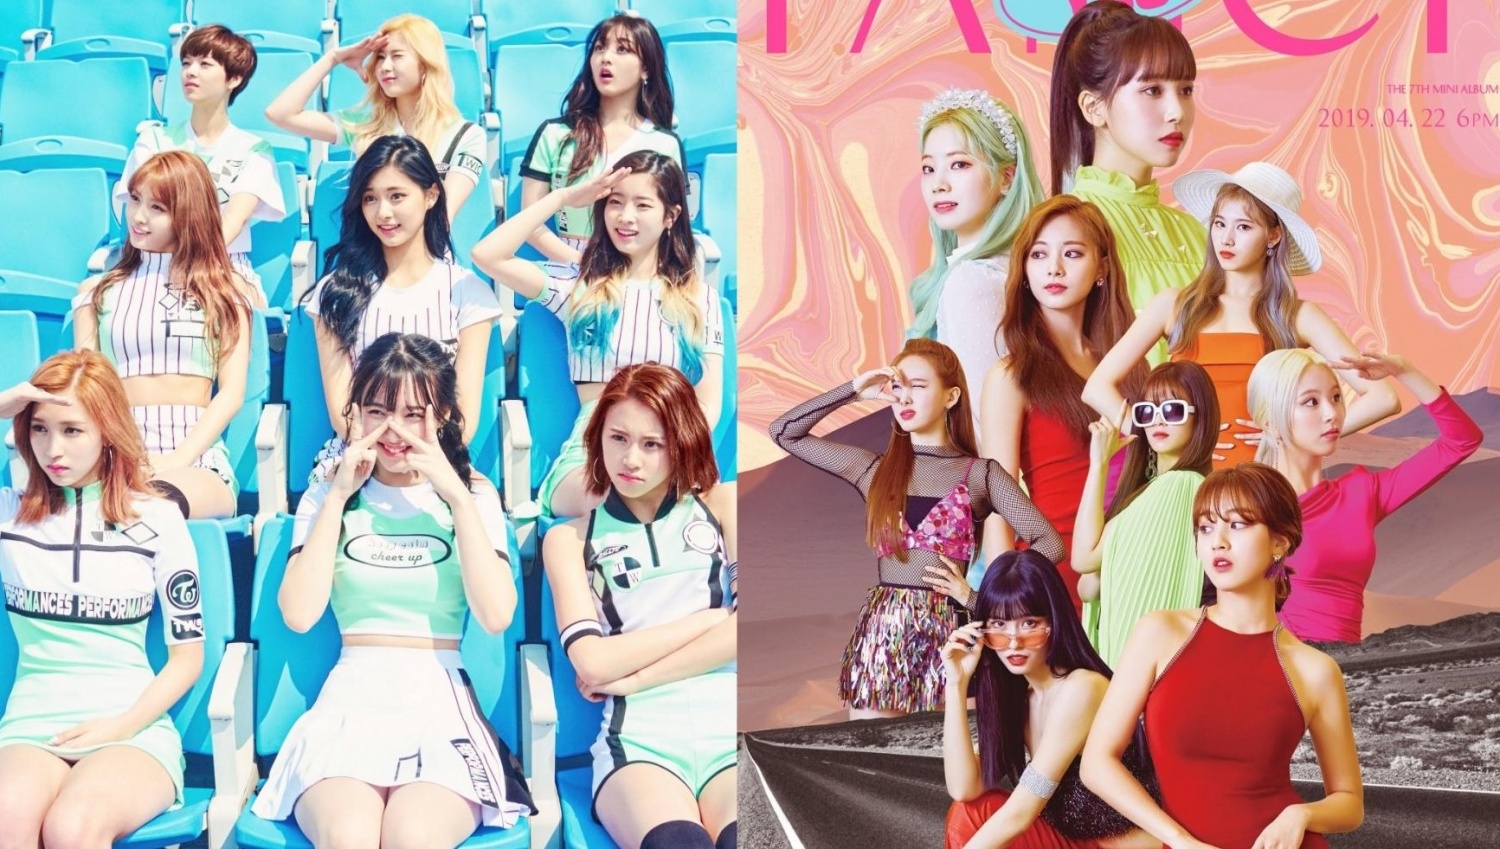 TWICE Members who owned THESE 9 eras: “CHEER UP”, “FANCY” and more!